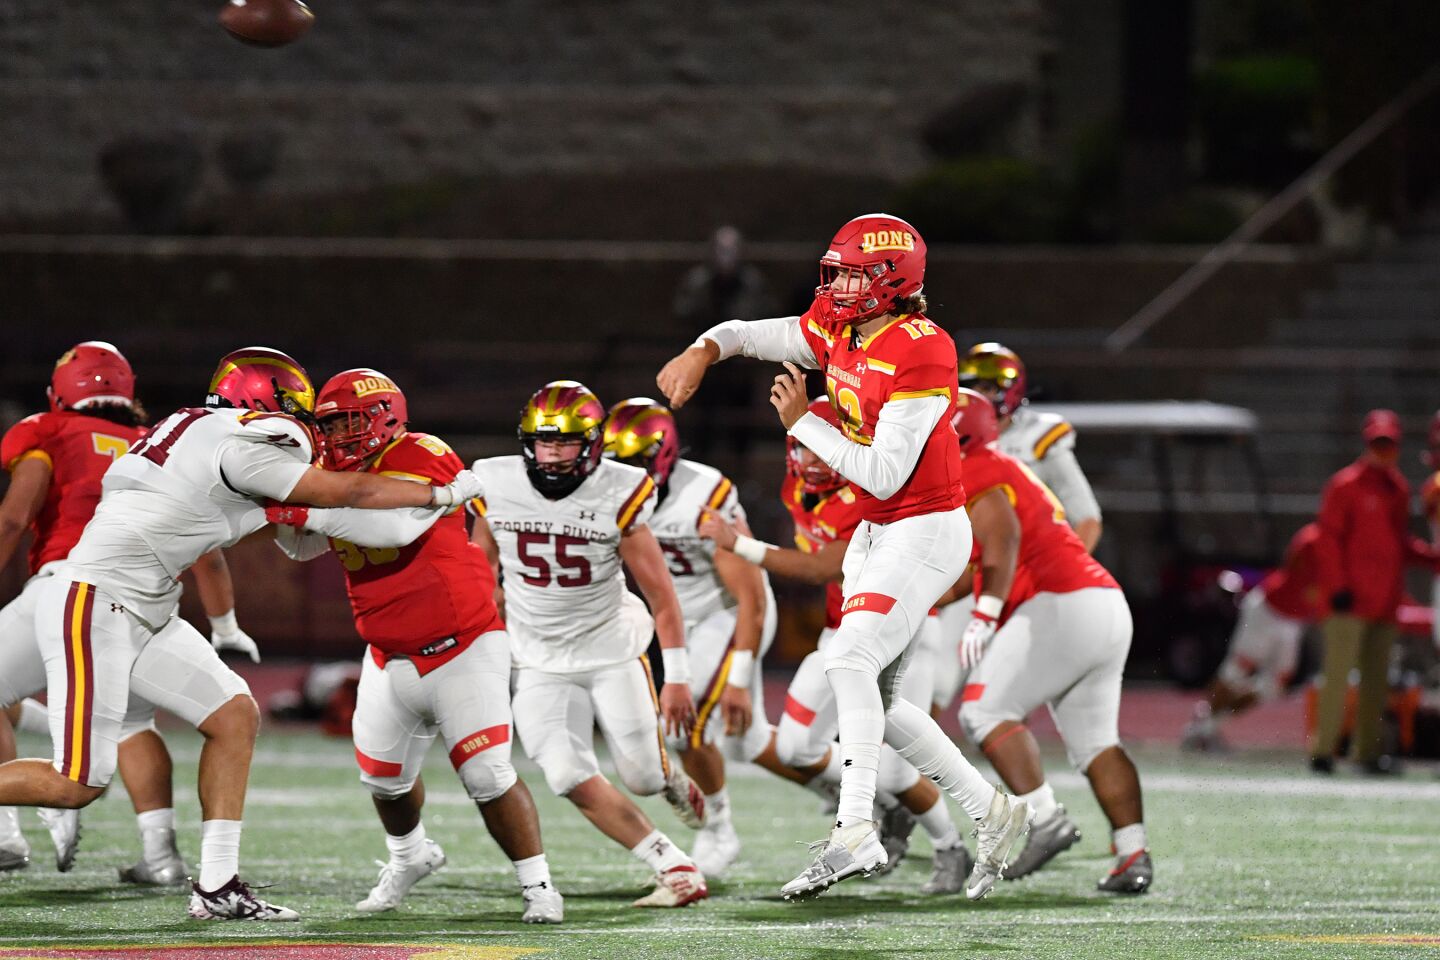 Cathedral Catholic quarterback Charlie Mirer completed 5 of 9 passes for 173 yards and three touchdowns.